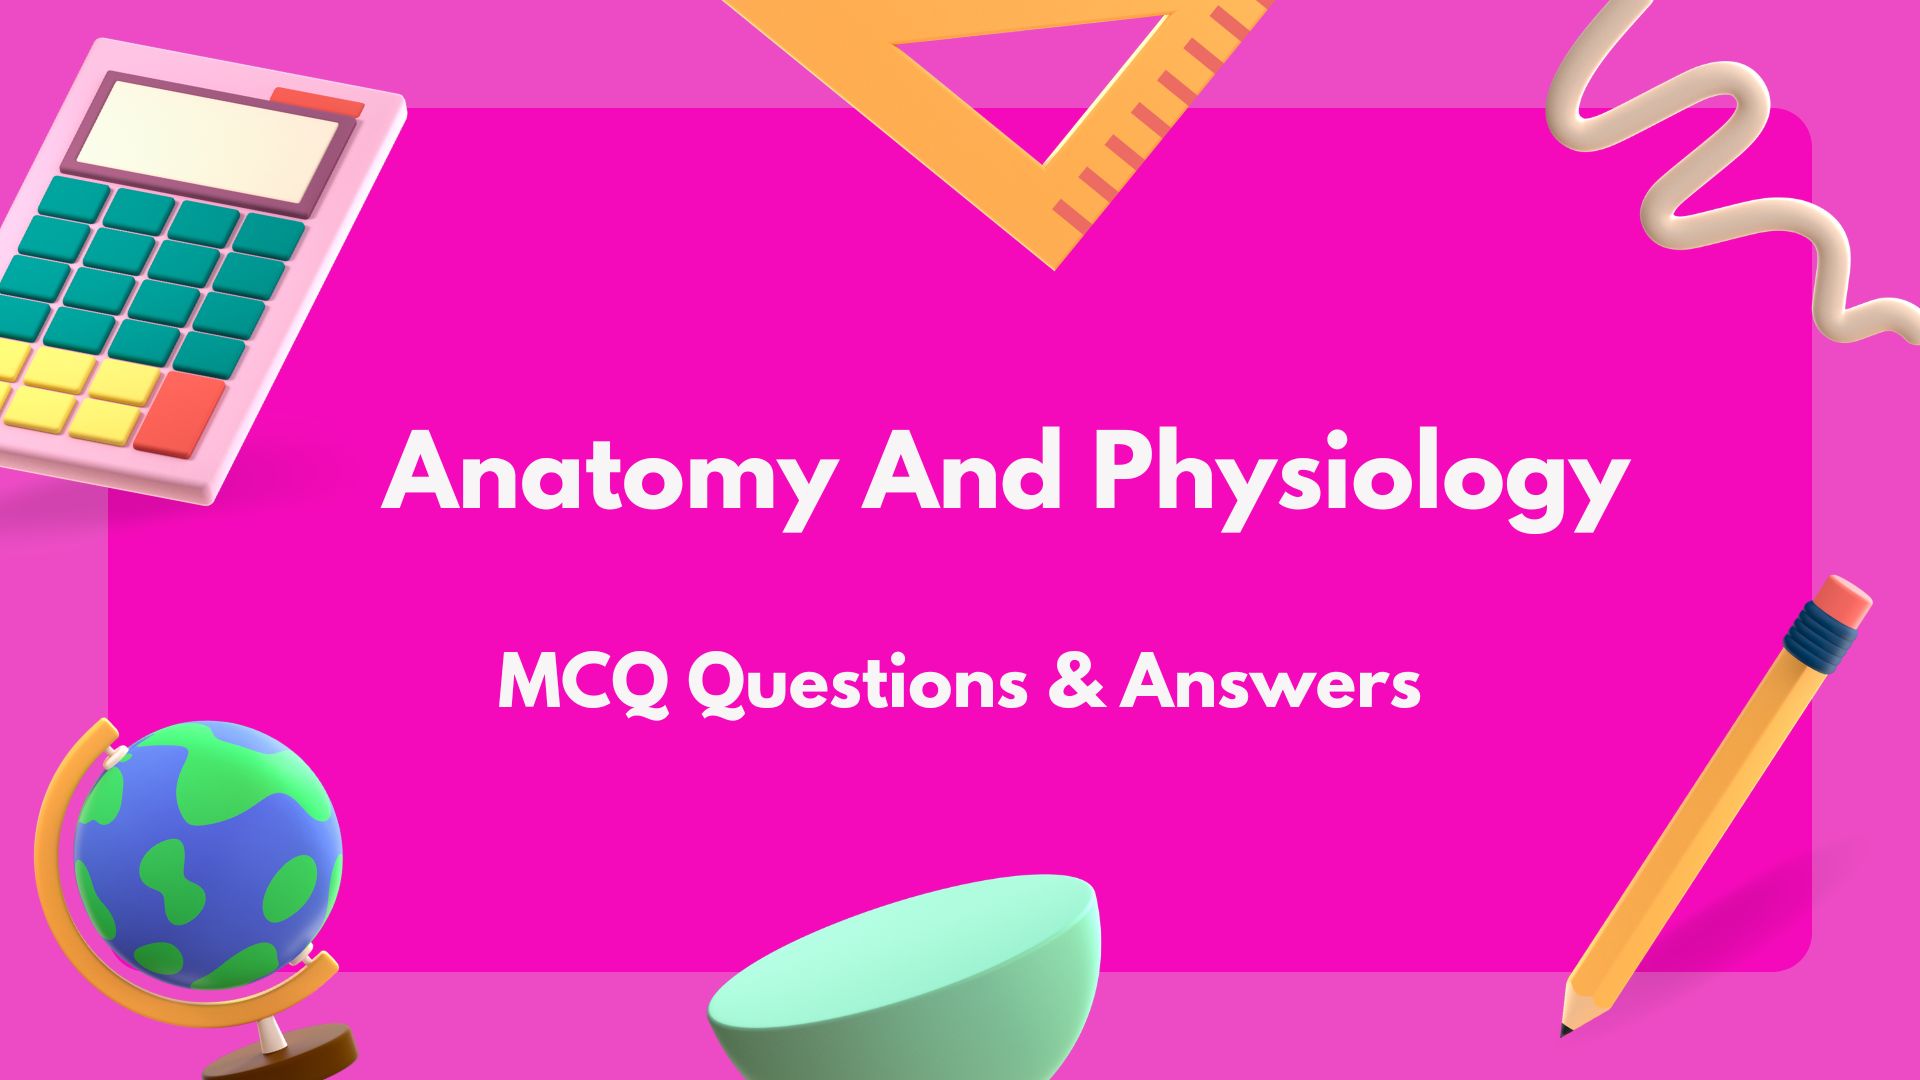 Anatomy And Physiology MCQ Questions and Answers